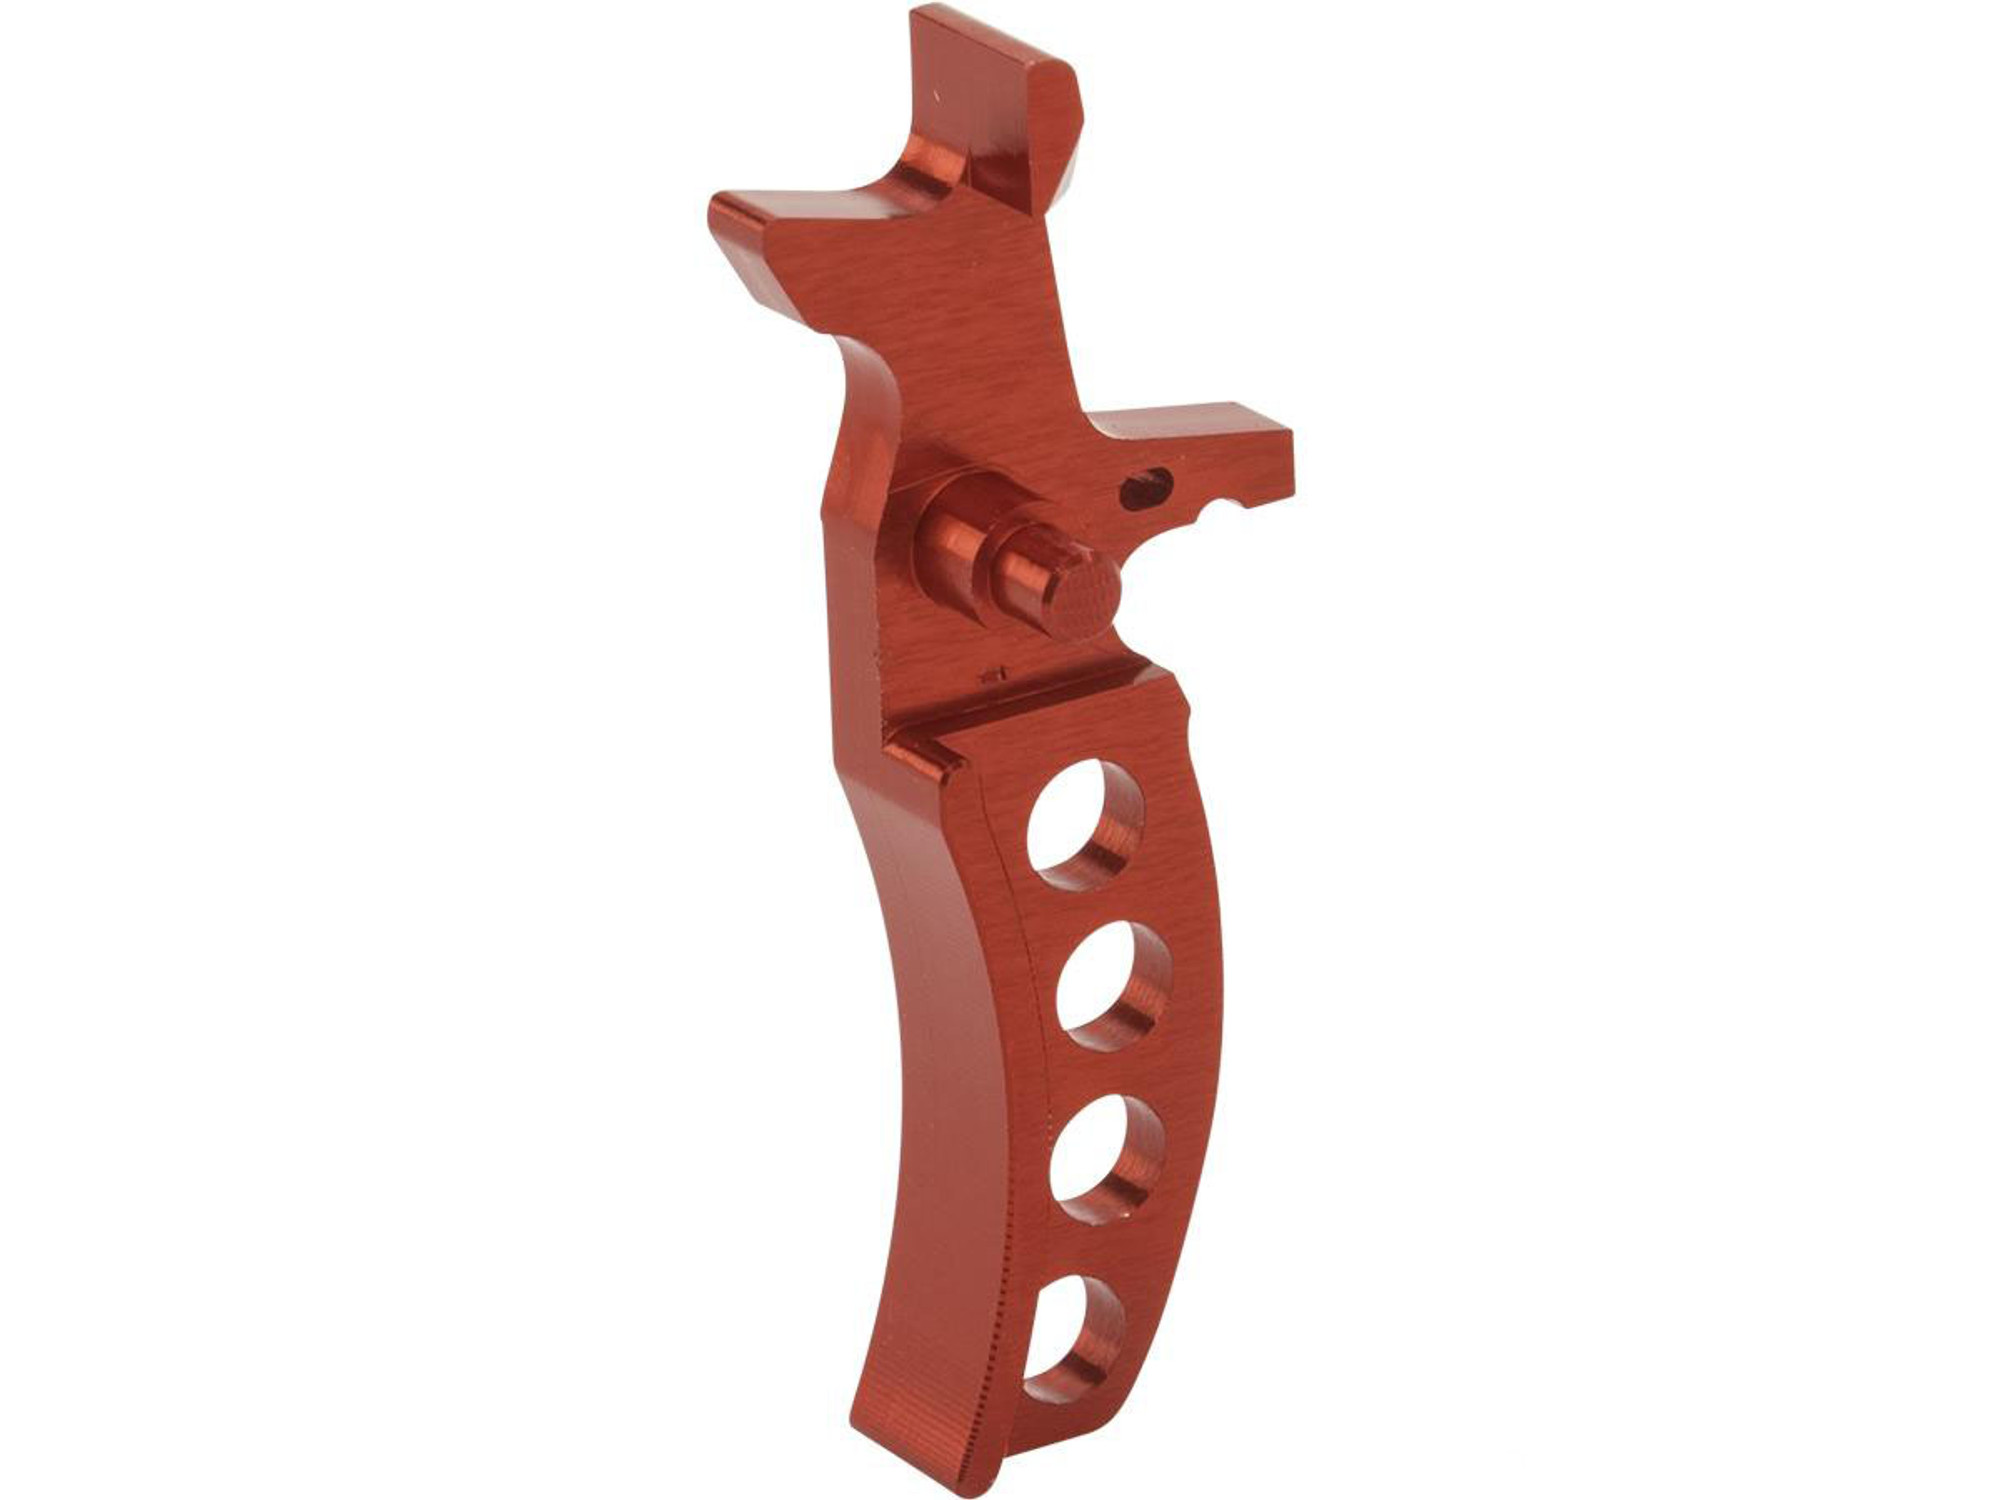 Retro Arms CNC Machined Aluminum Trigger for M4 / M16 Series AEG Rifles (Color: Red / Style D)